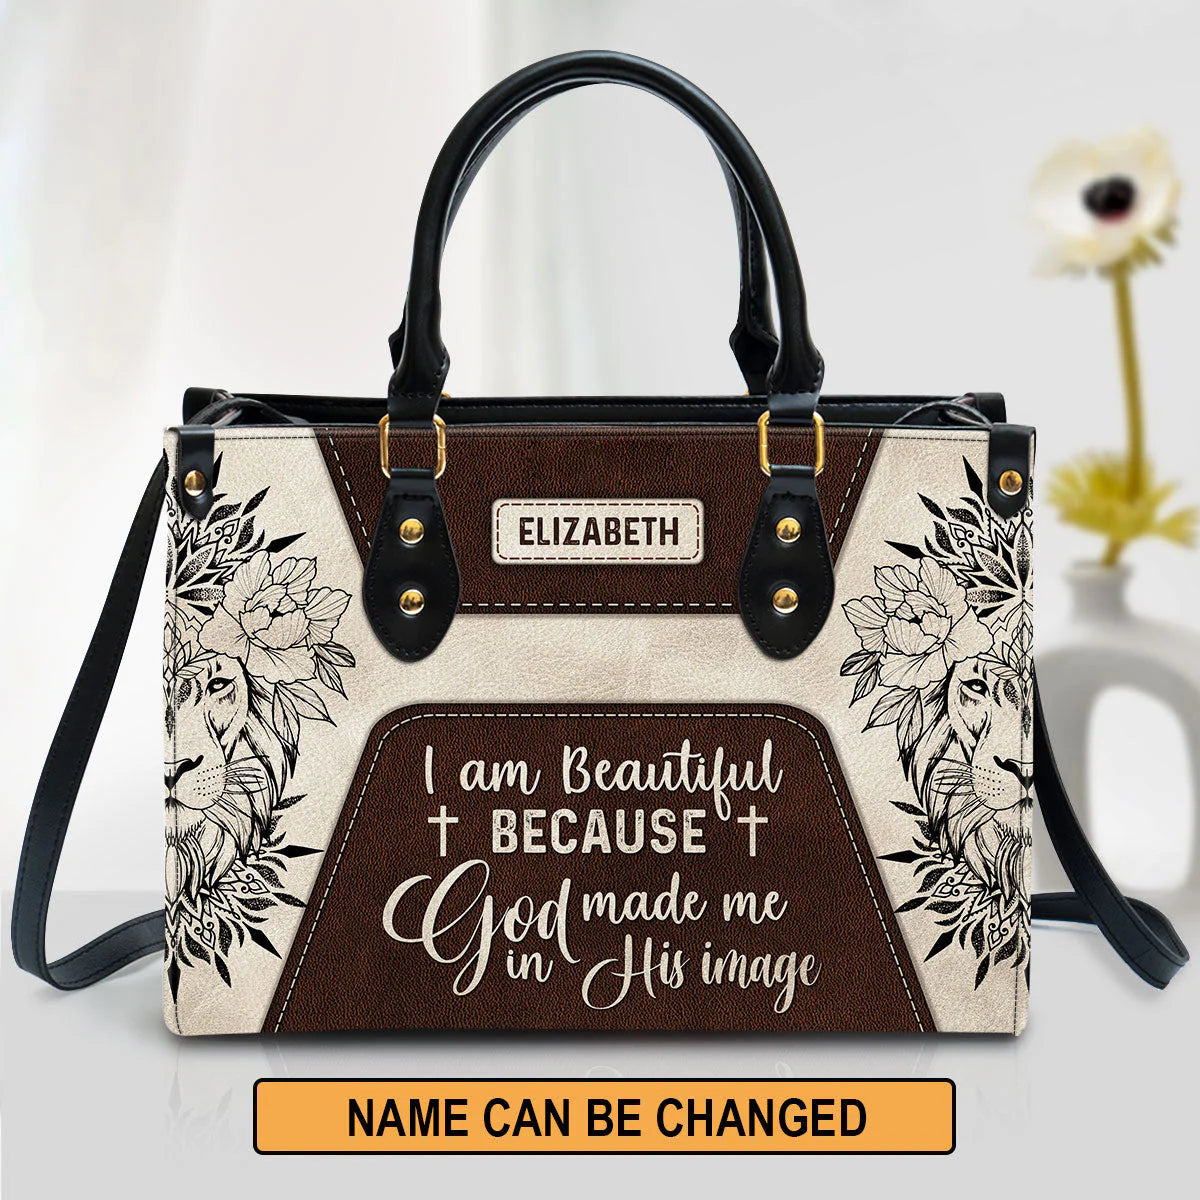 Christianartbag Handbag, I Am Beautiful Because God Made Me In His Image, Personalized Gifts, Gifts for Women, Christmas Gift. - Christian Art Bag